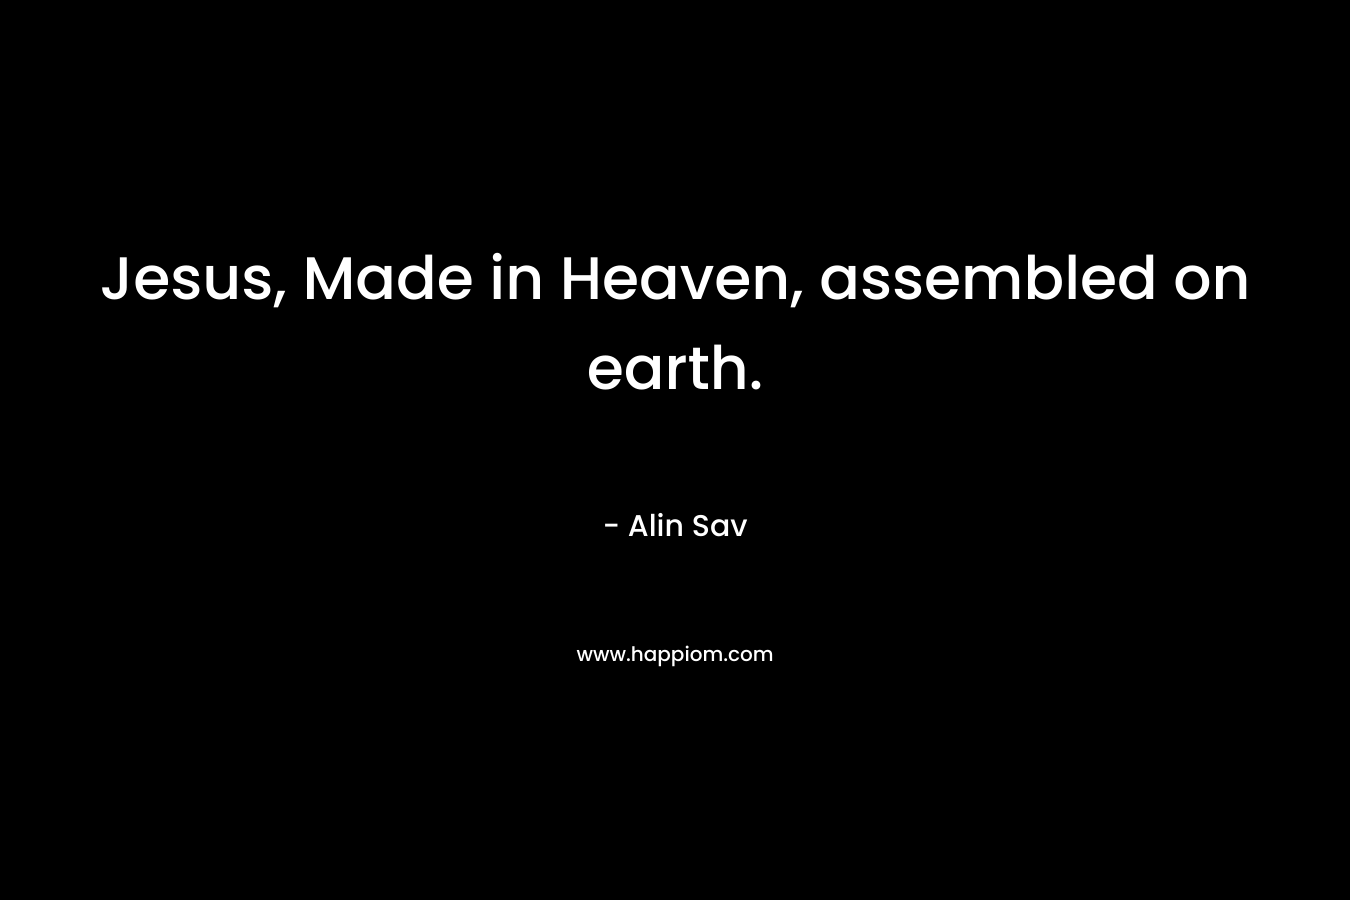 Jesus, Made in Heaven, assembled on earth.